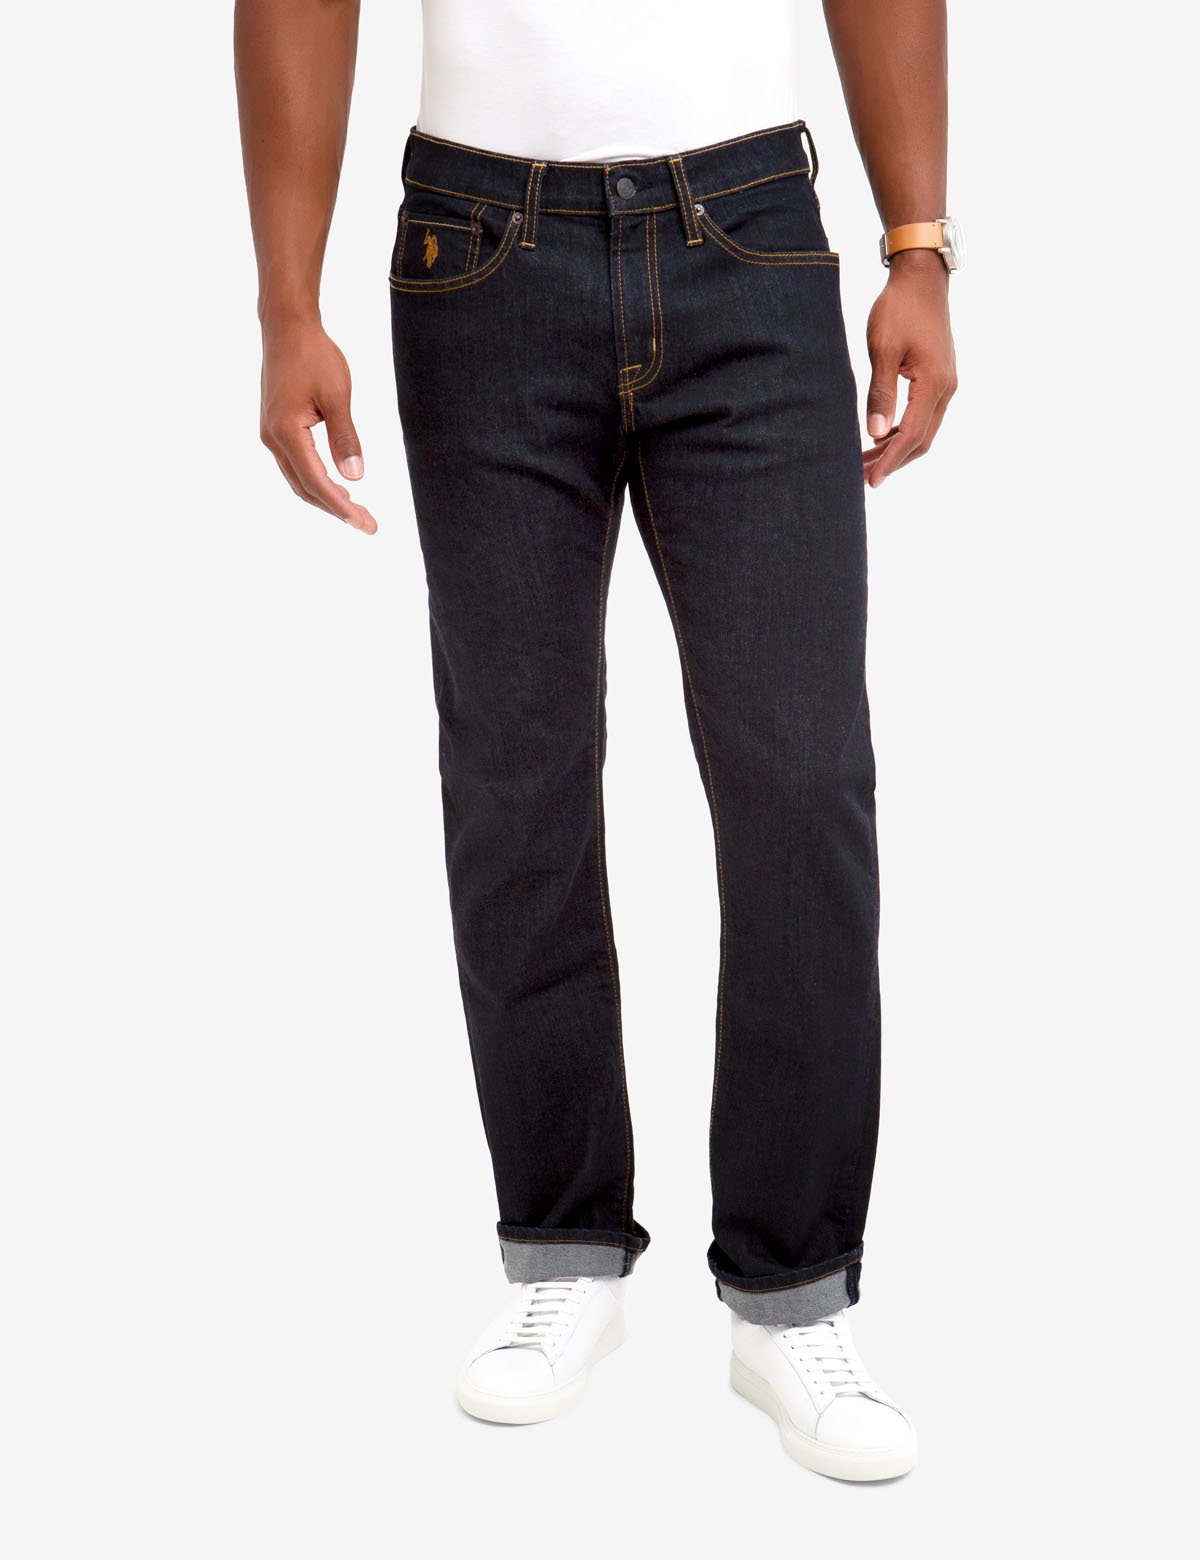 polo slim fit jeans